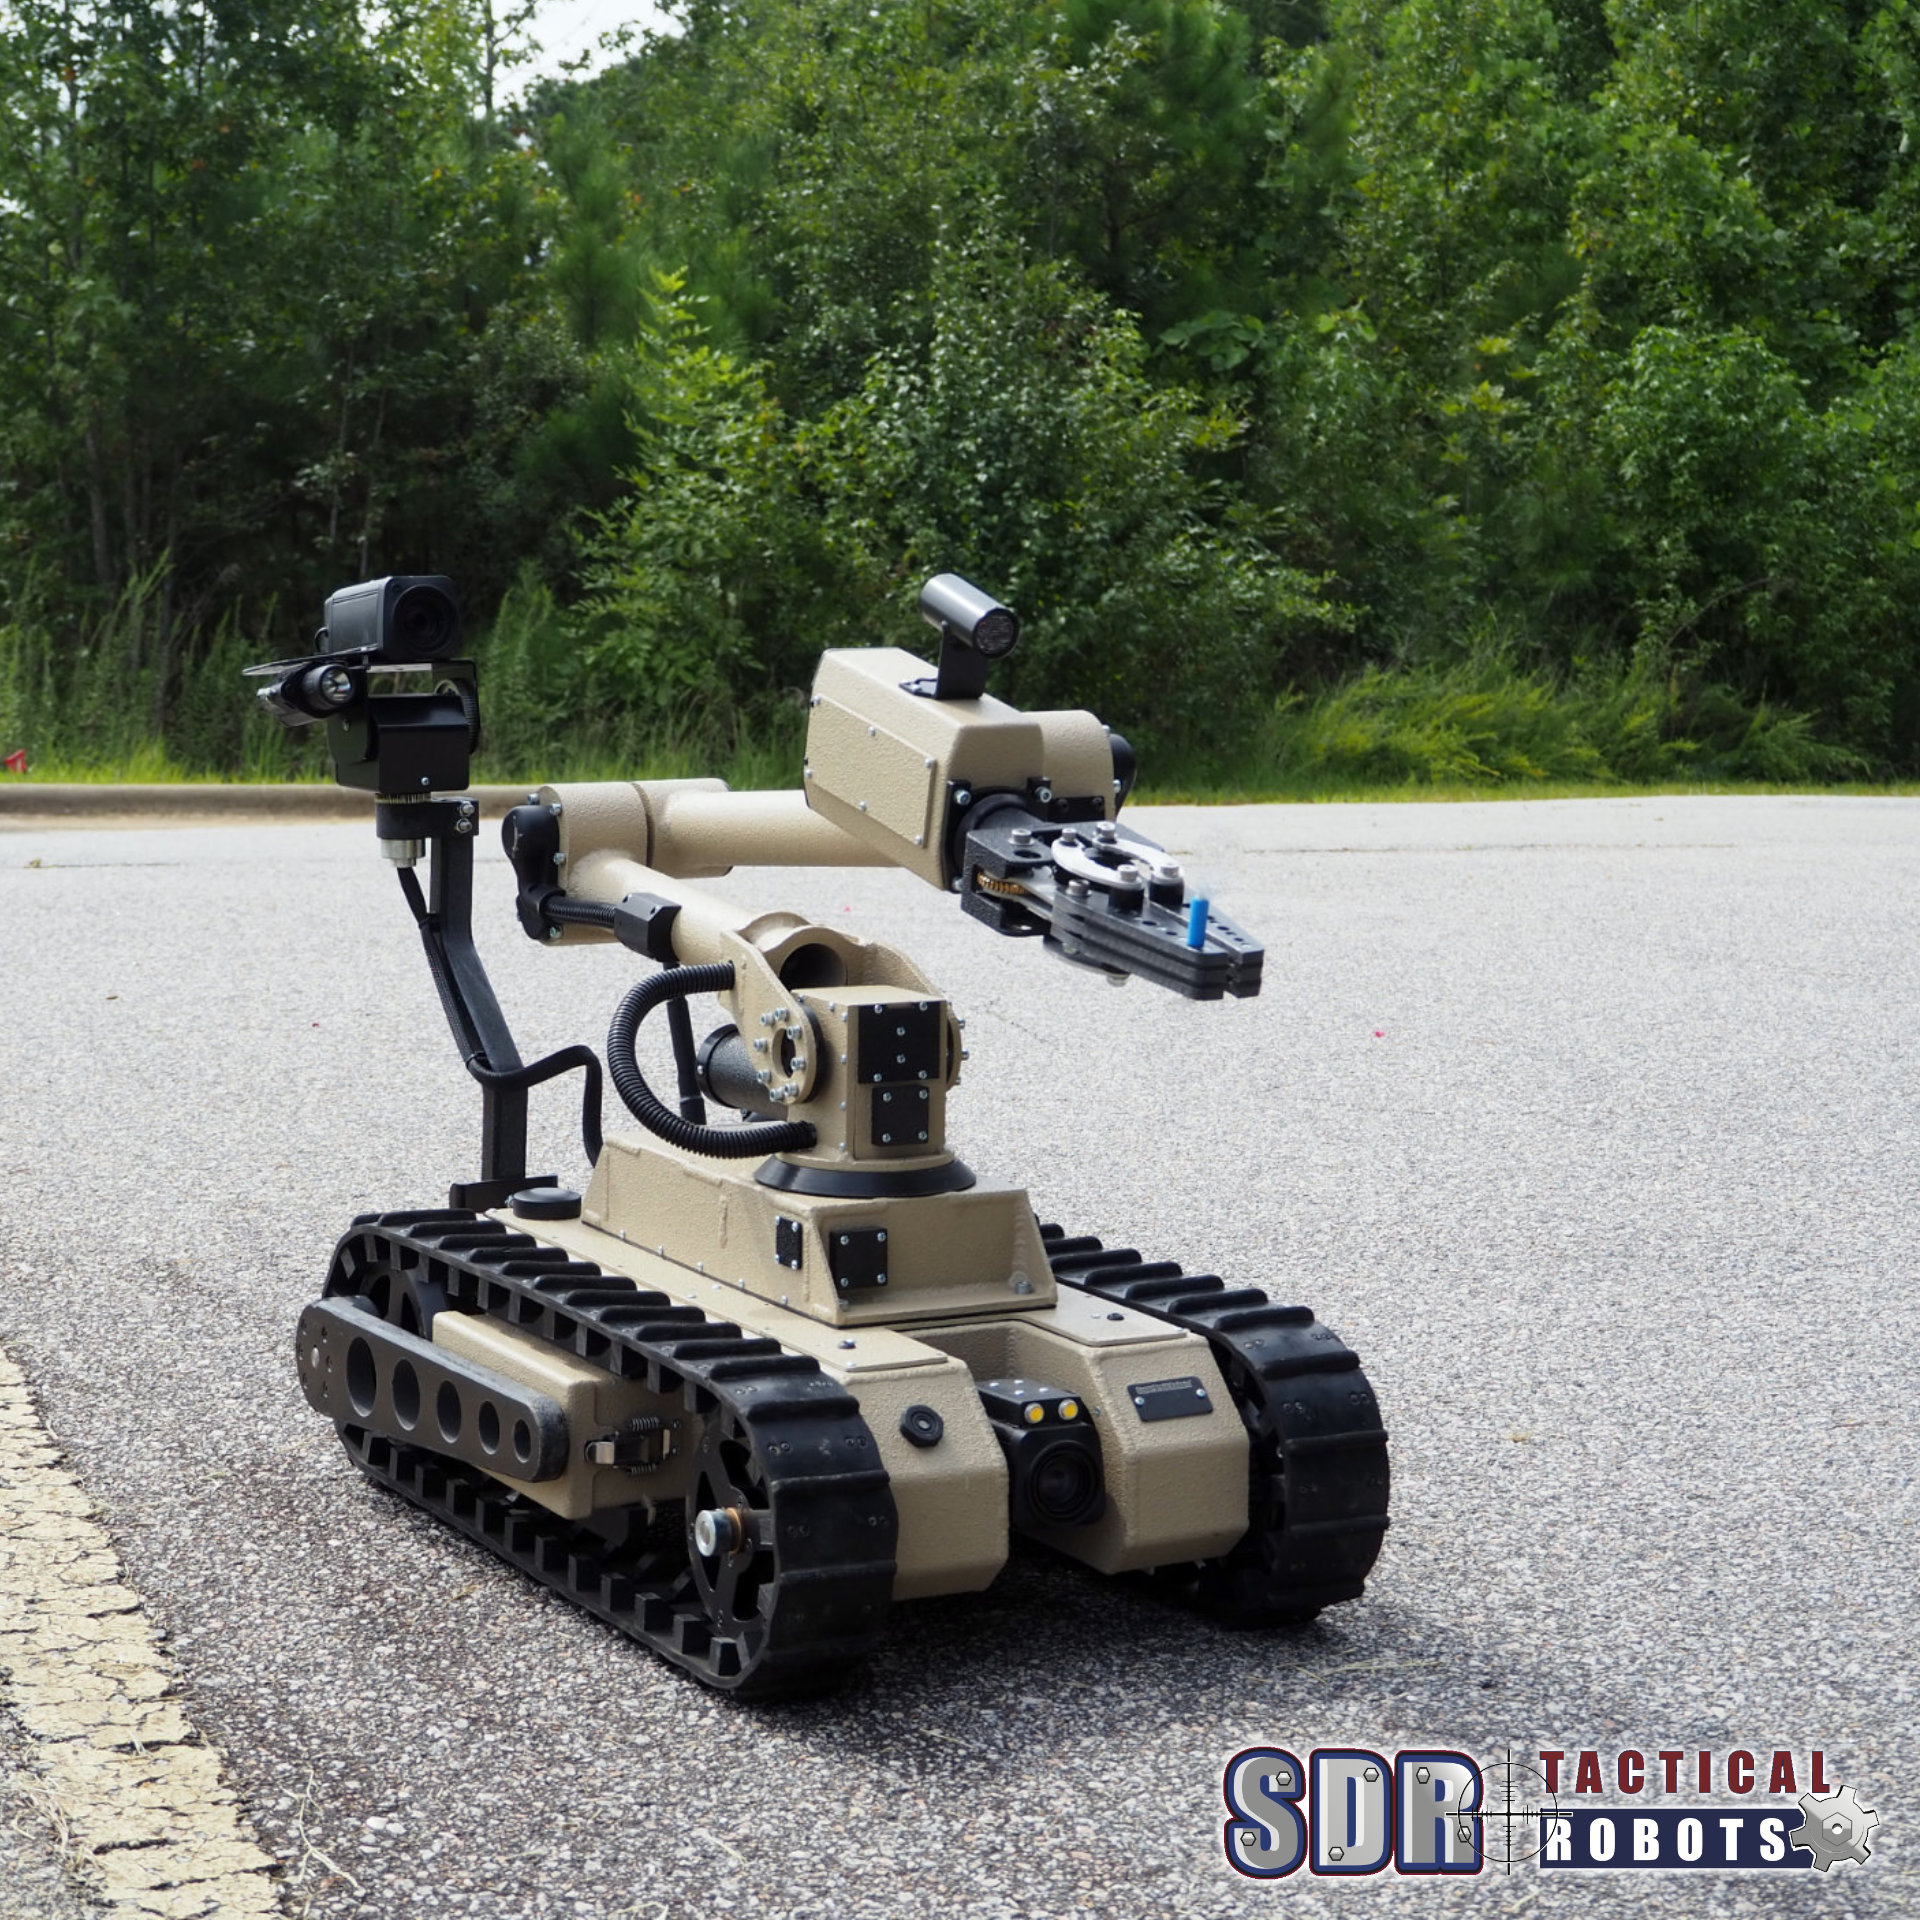 SuperDroid Robots Twitter: "Protect your team with our #tactical #support #robot. This #UGV system is ready to put itself in harms way so you have to. Learn more about